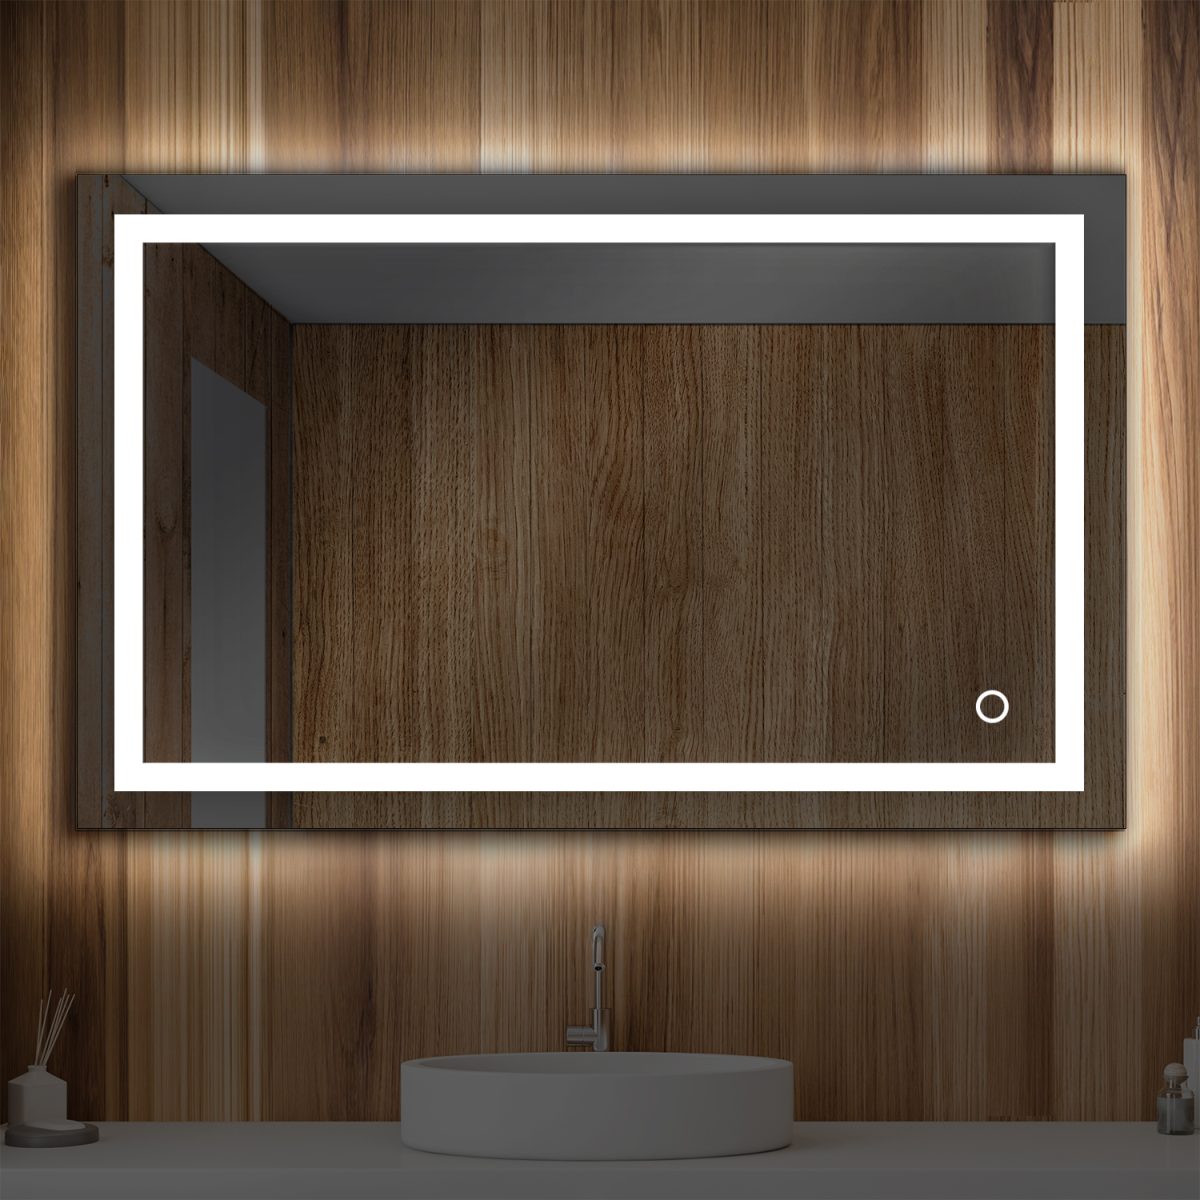 36 in. x 48 in. Vanity Mirror with Lights, Anti-Fog, CRI 90+, Makeup Mirror with Lights, Touch Switch Control, CCT Adjustable With Remembrance, LED Mirror for Bathroom, Inner Window Style